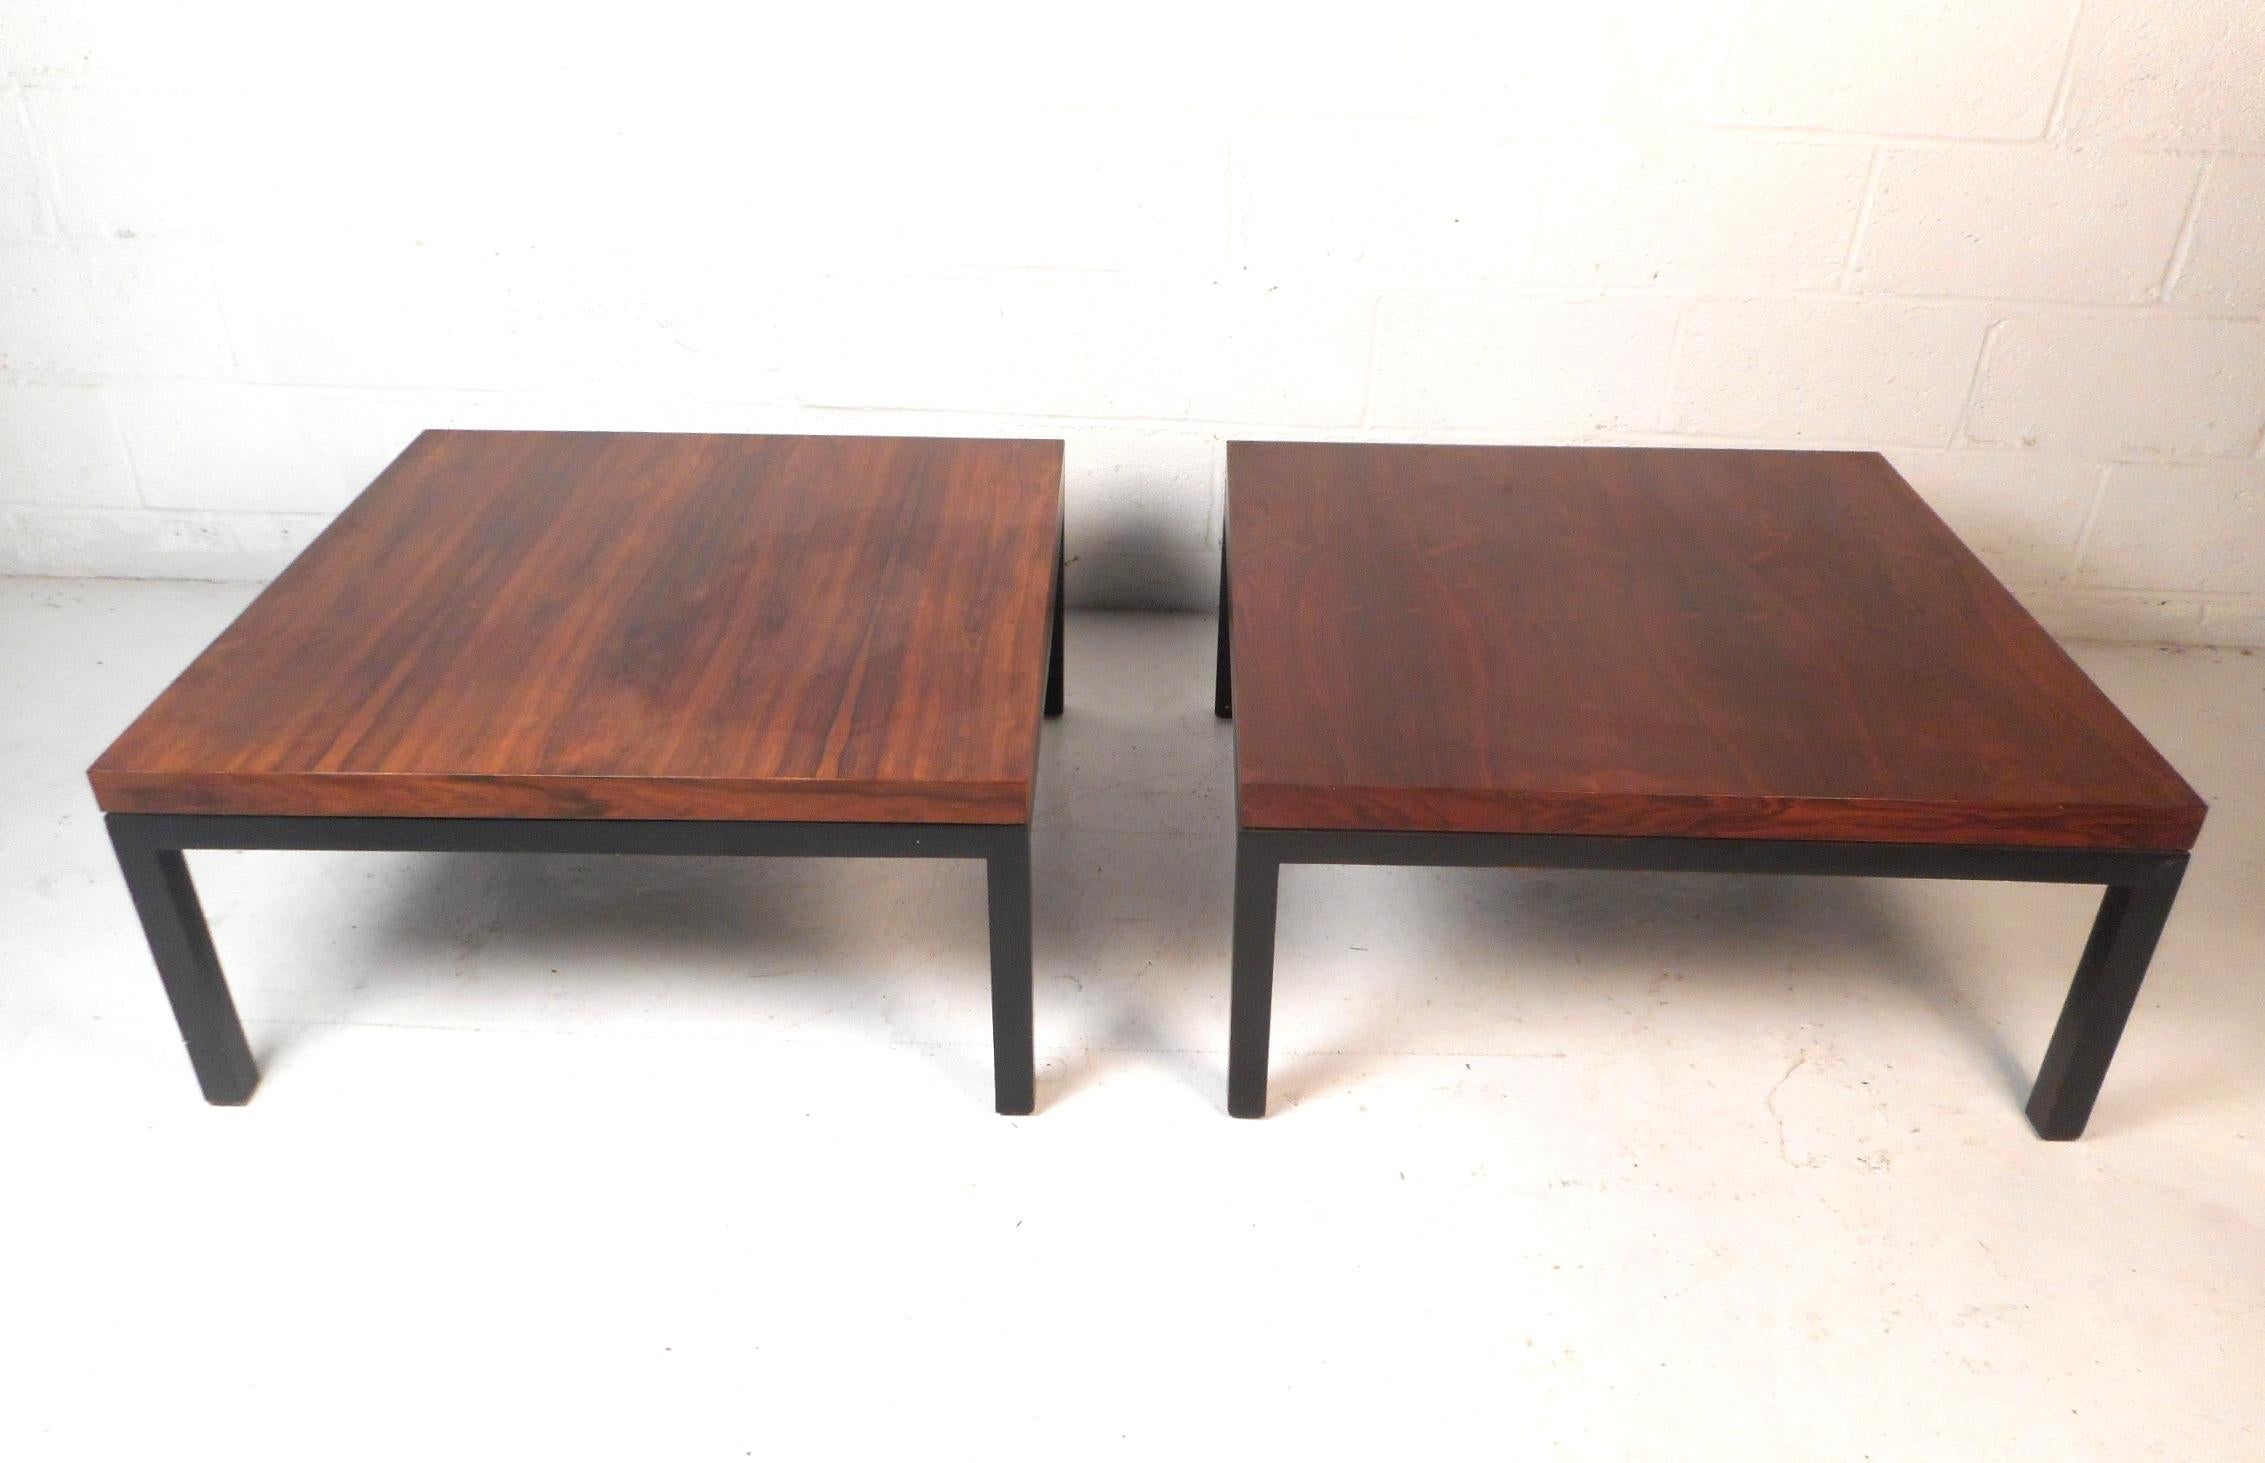 These stunning midcentury designer coffee tables feature beautiful finished rosewood tabletops, and sturdy ebonized legs. These sought after tables are a perfect addition to any modern interior. Made by Milo Baughman for Thayer Coggin in 1967.